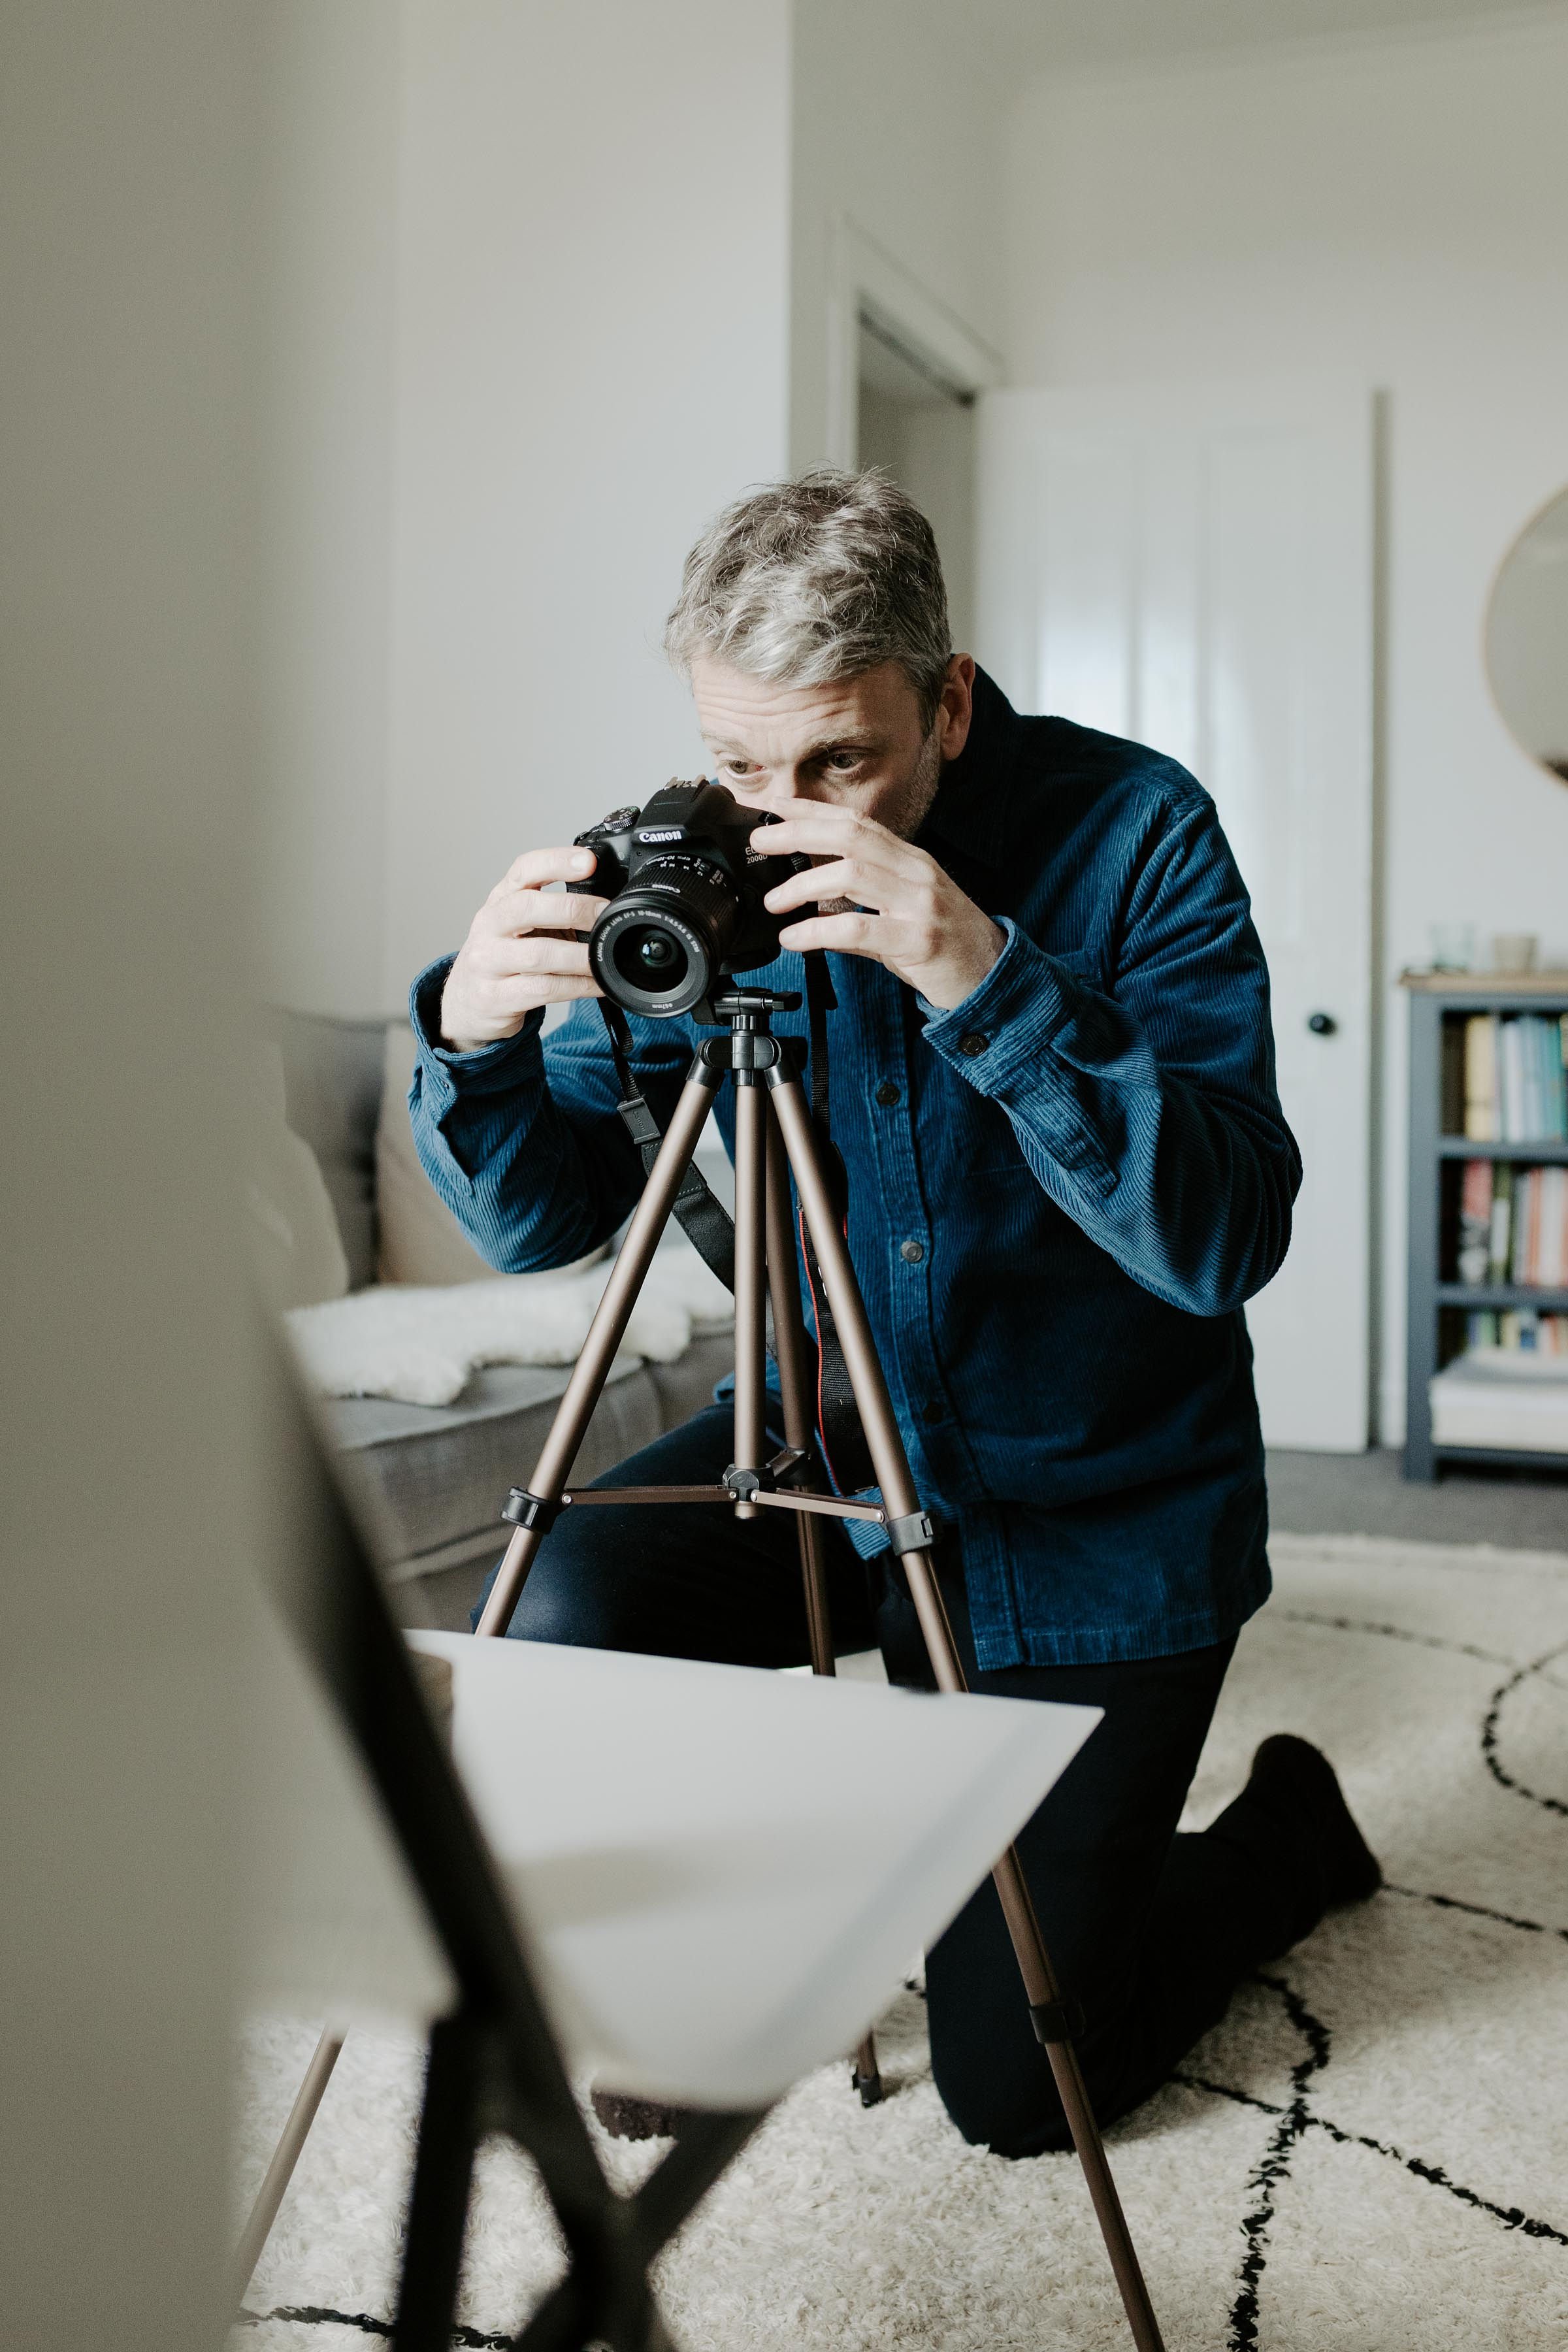 Man with camera taking photos in a living room